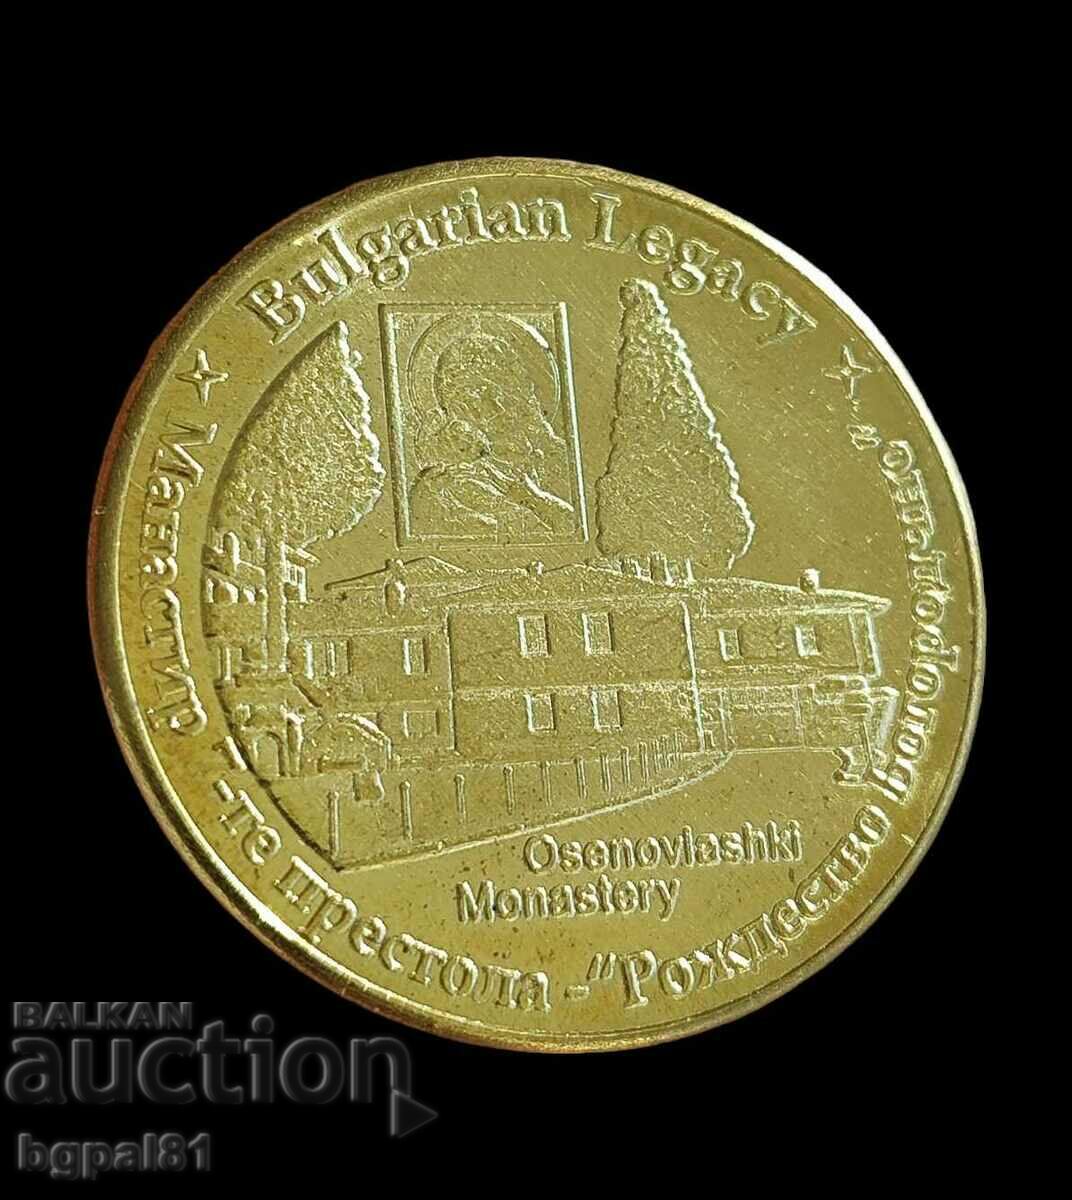 Monastery of the 7 thrones - Medal issue "Bulgarian legacy"